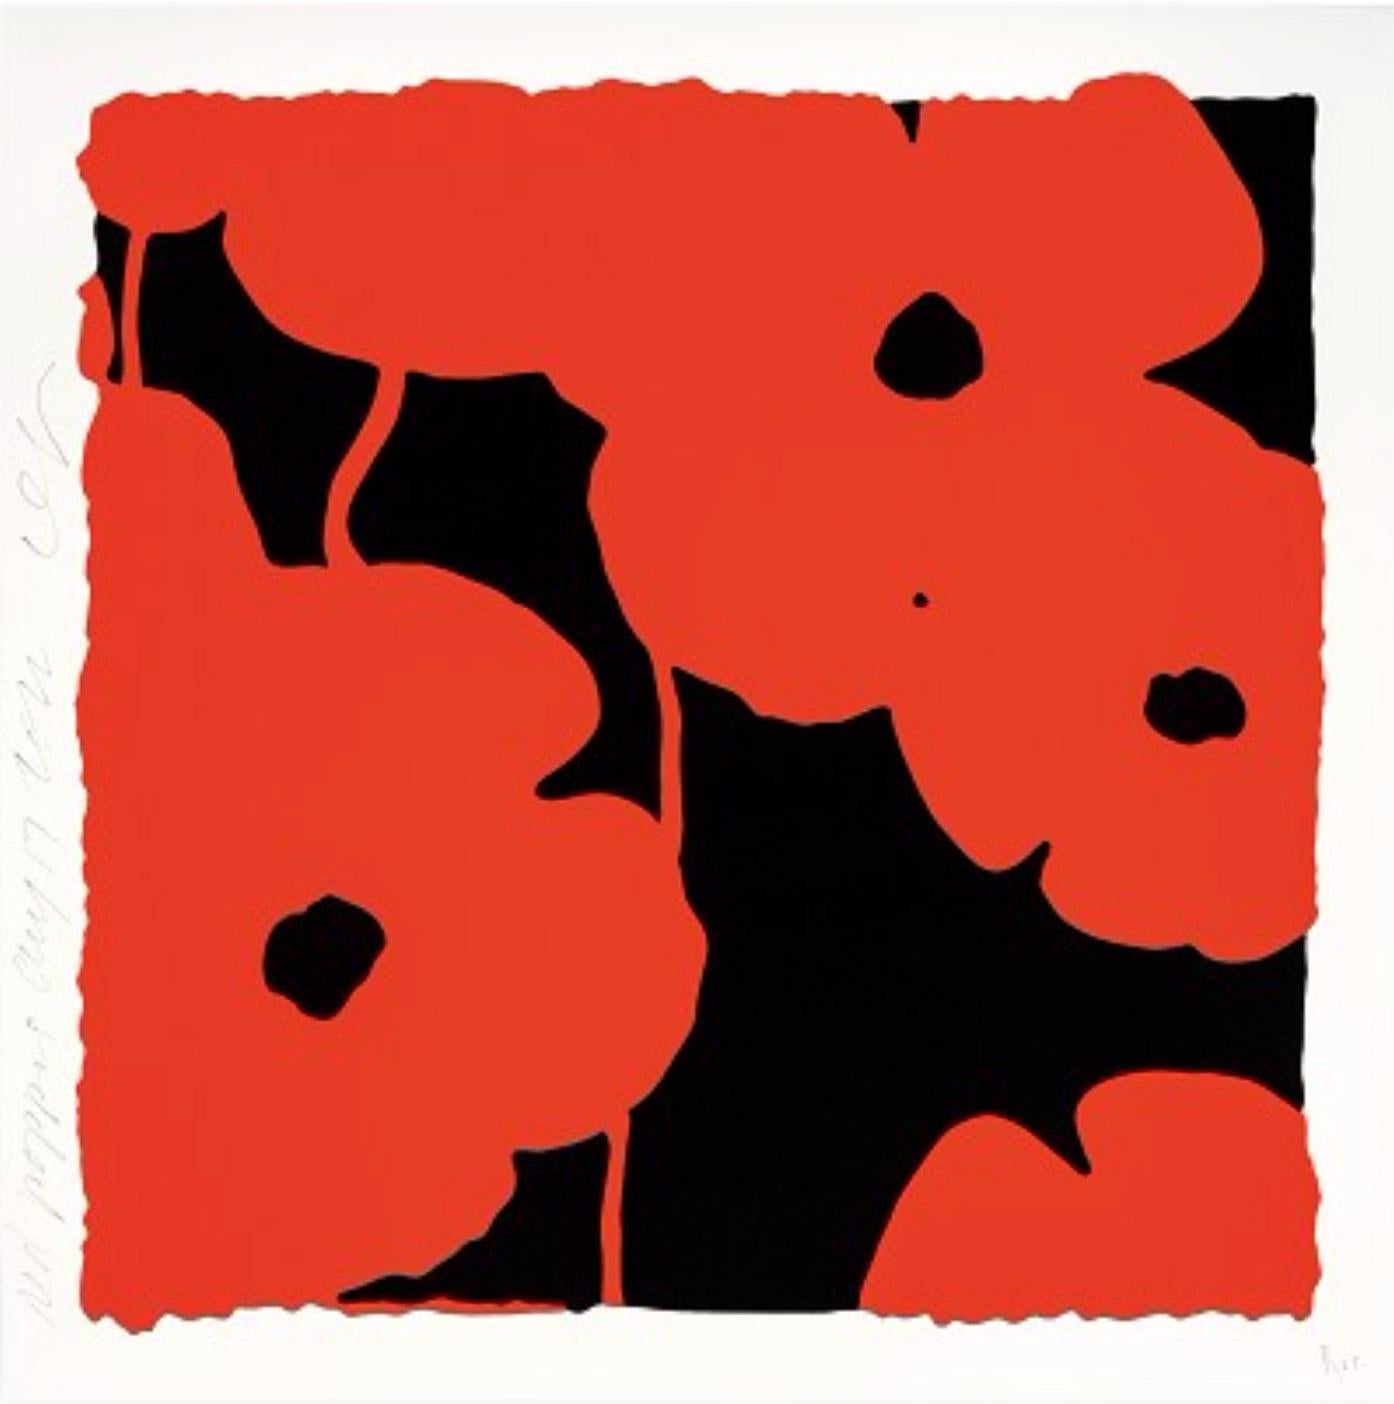 Donald Sultan Animal Print - Red Poppies, Aug 17, 2022 (Ed: 22/50) 